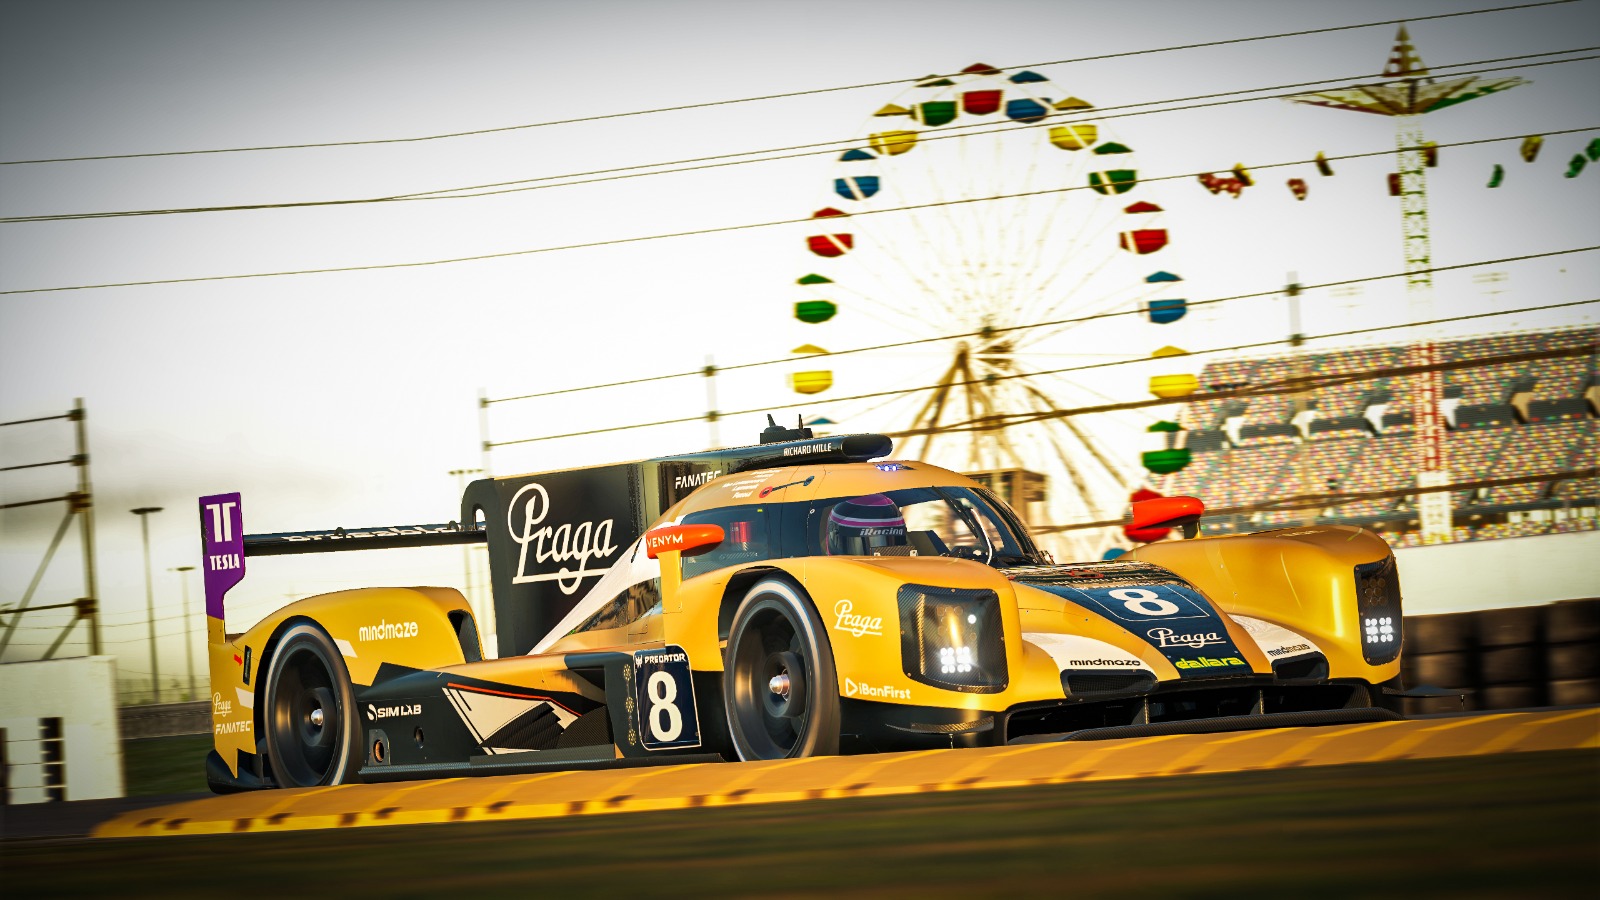 Praga and R8G join forces as Broadbent and Grosjean take to the virtual wheel in the iRacing Daytona 24